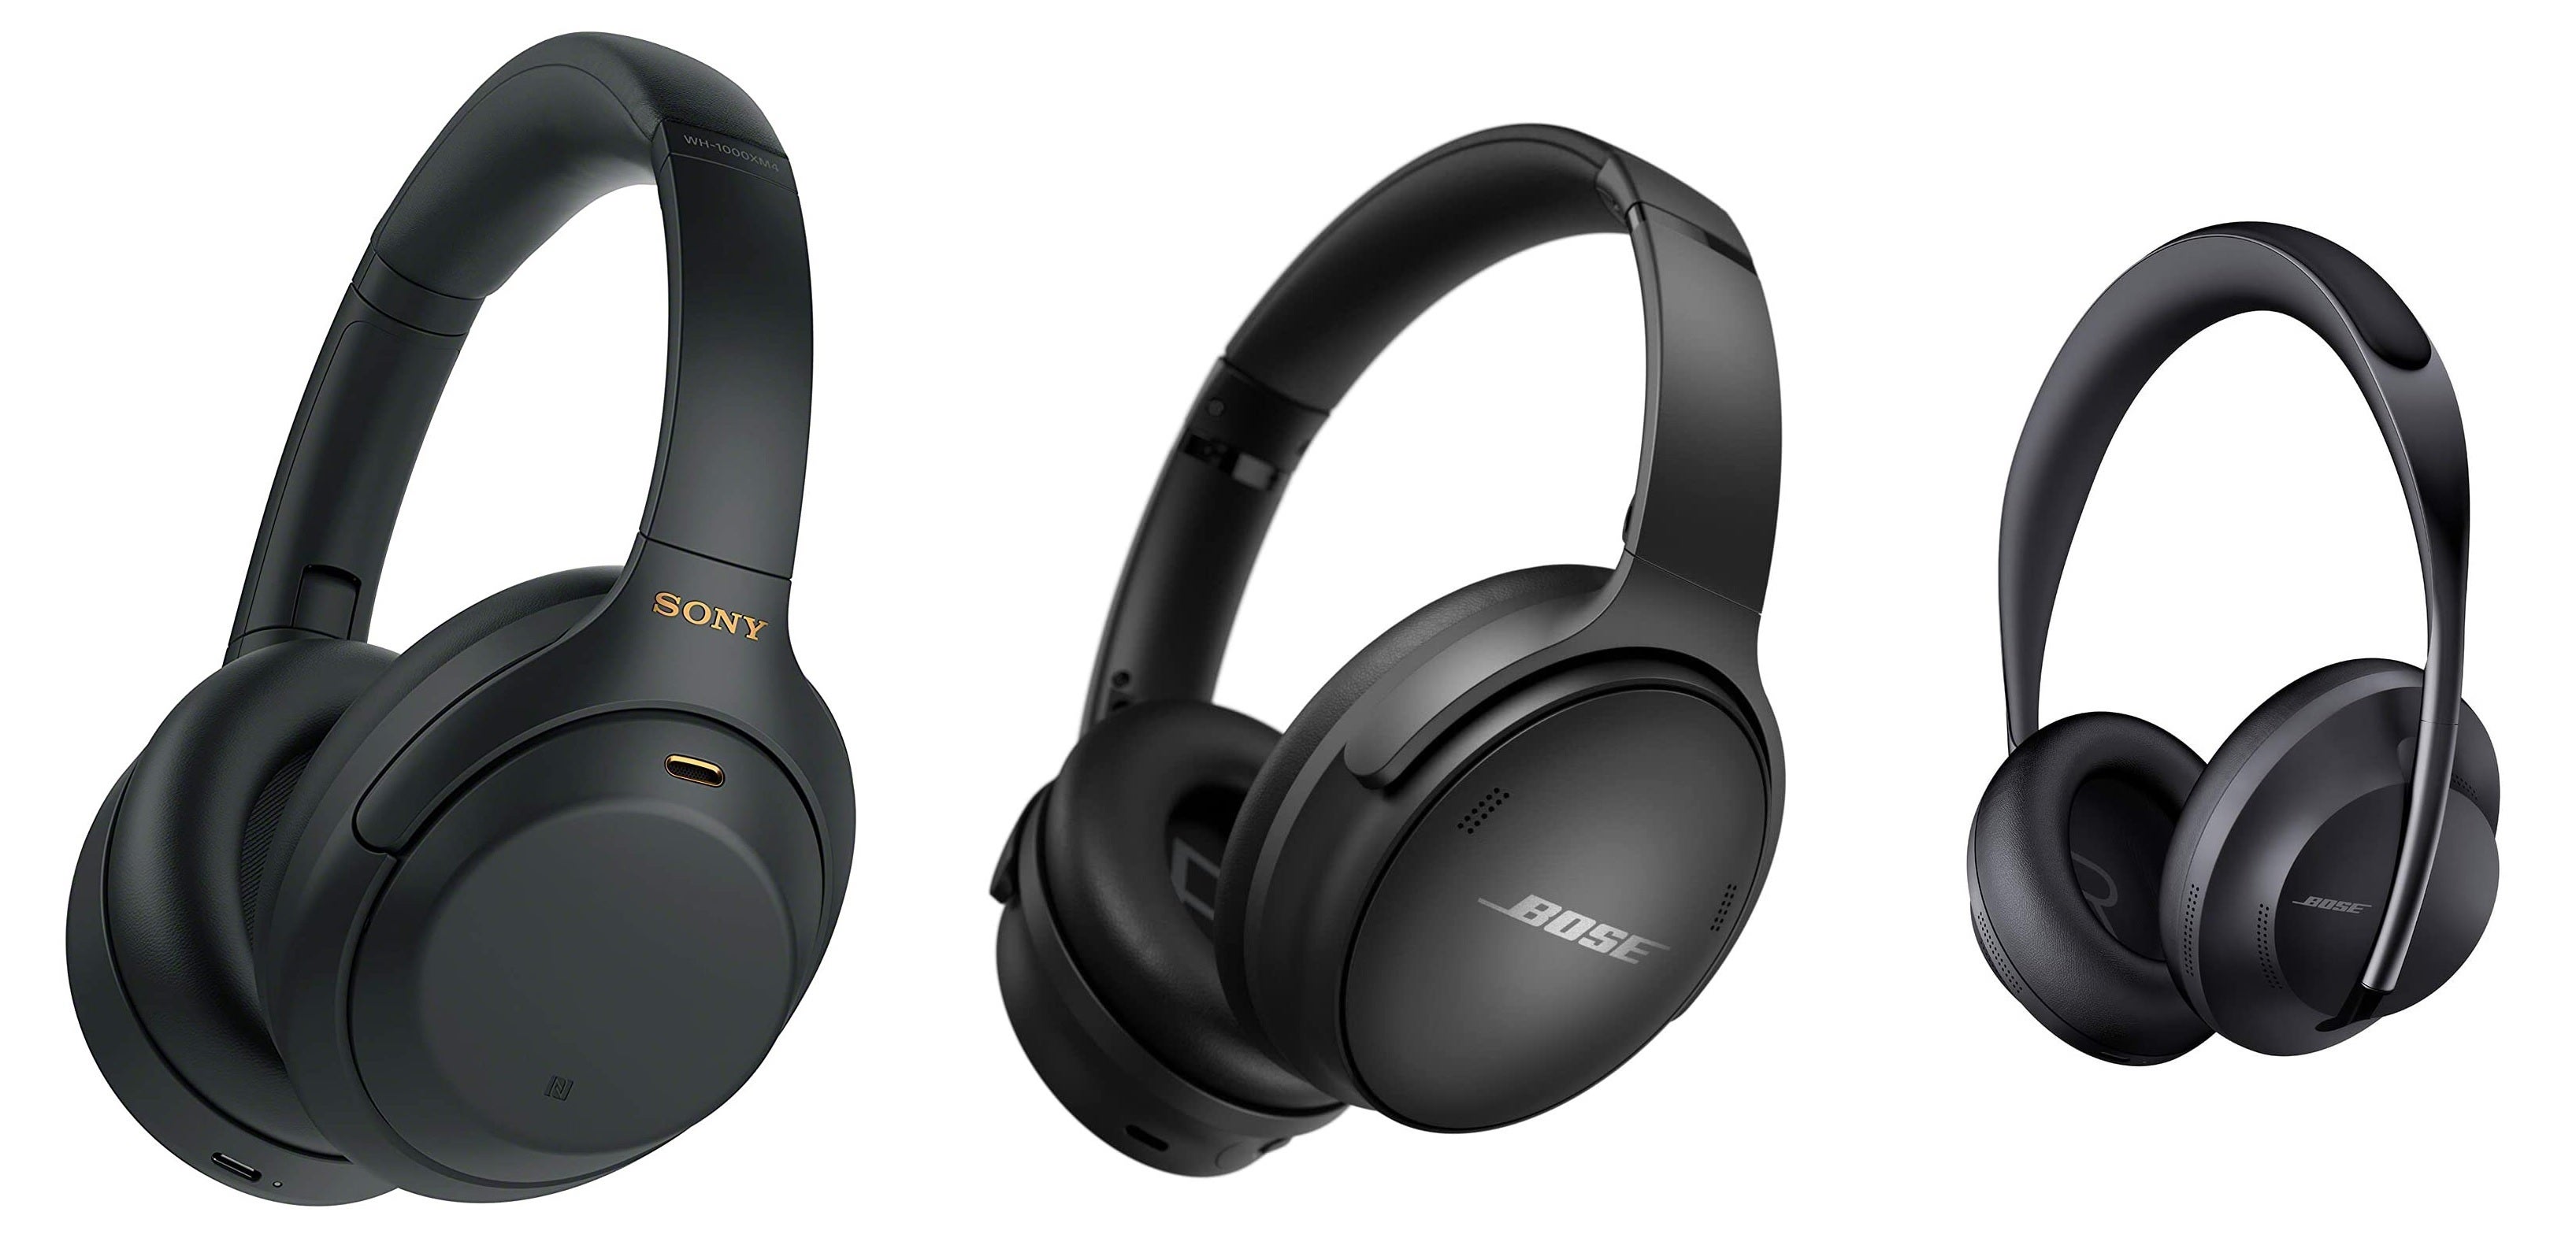 pint kalender Far Buying guide: Sony WH-1000XM4 vs Bose QuietComfort 45 vs Bose 700 and Sony  WH-XB910N vs Beats Solo3 vs Sony WH-CH710N - PhoneArena